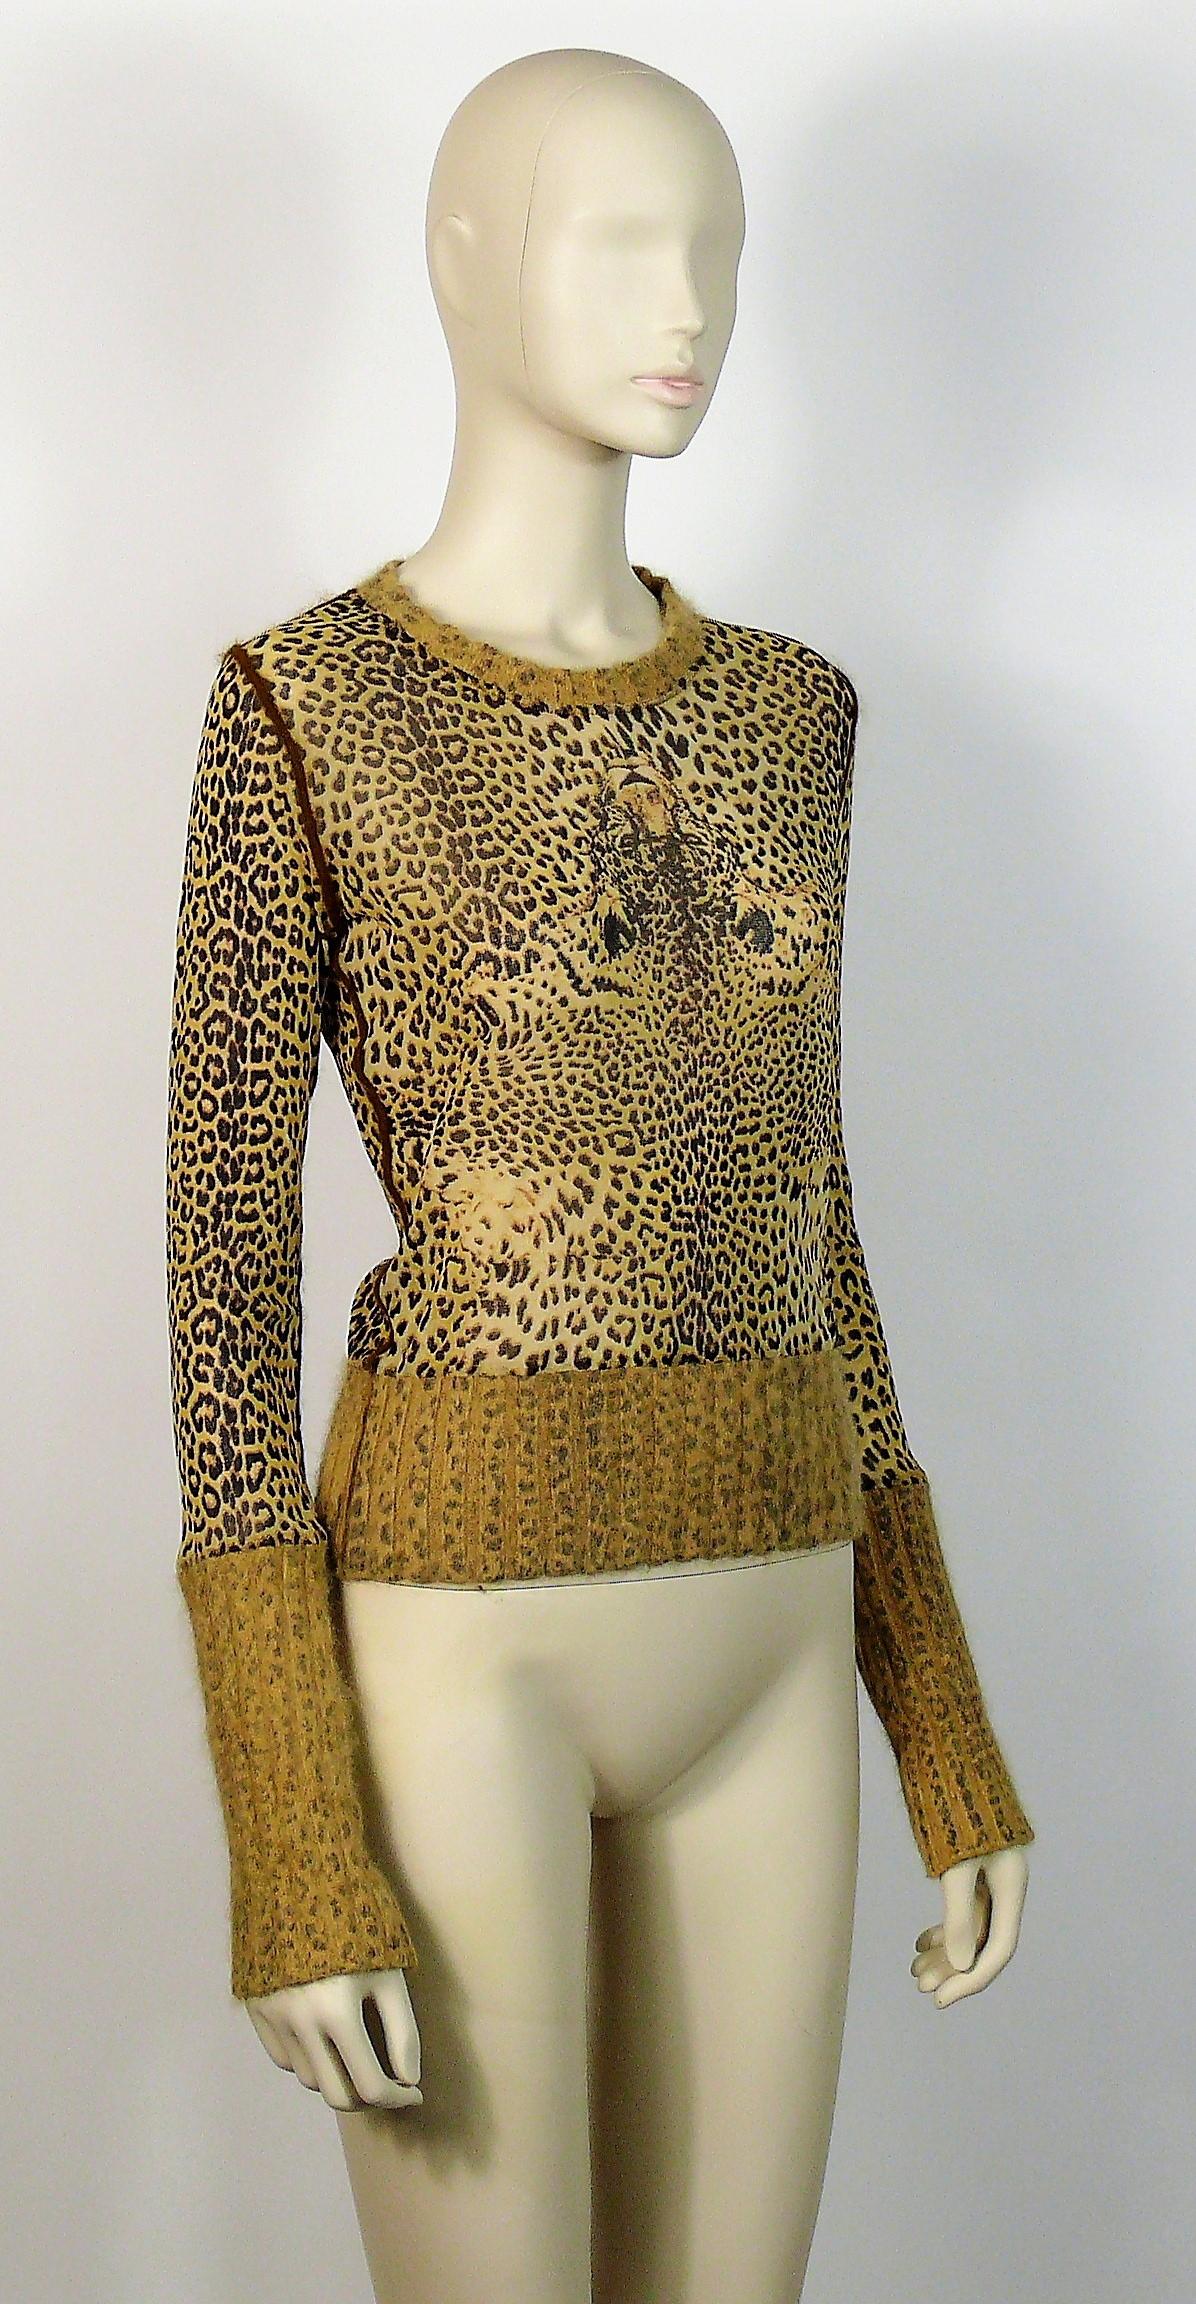 JEAN PAUL GAULTIER Fuzzi sheer mesh long sleeve top with cheetah print featuring gorgeous angora wool collar, cuffs and bottom.

Label reads JEAN PAUL GAULTIER Maille Femme Made in Italy.

Size tag reads : L.

Composition tag reads : 100%